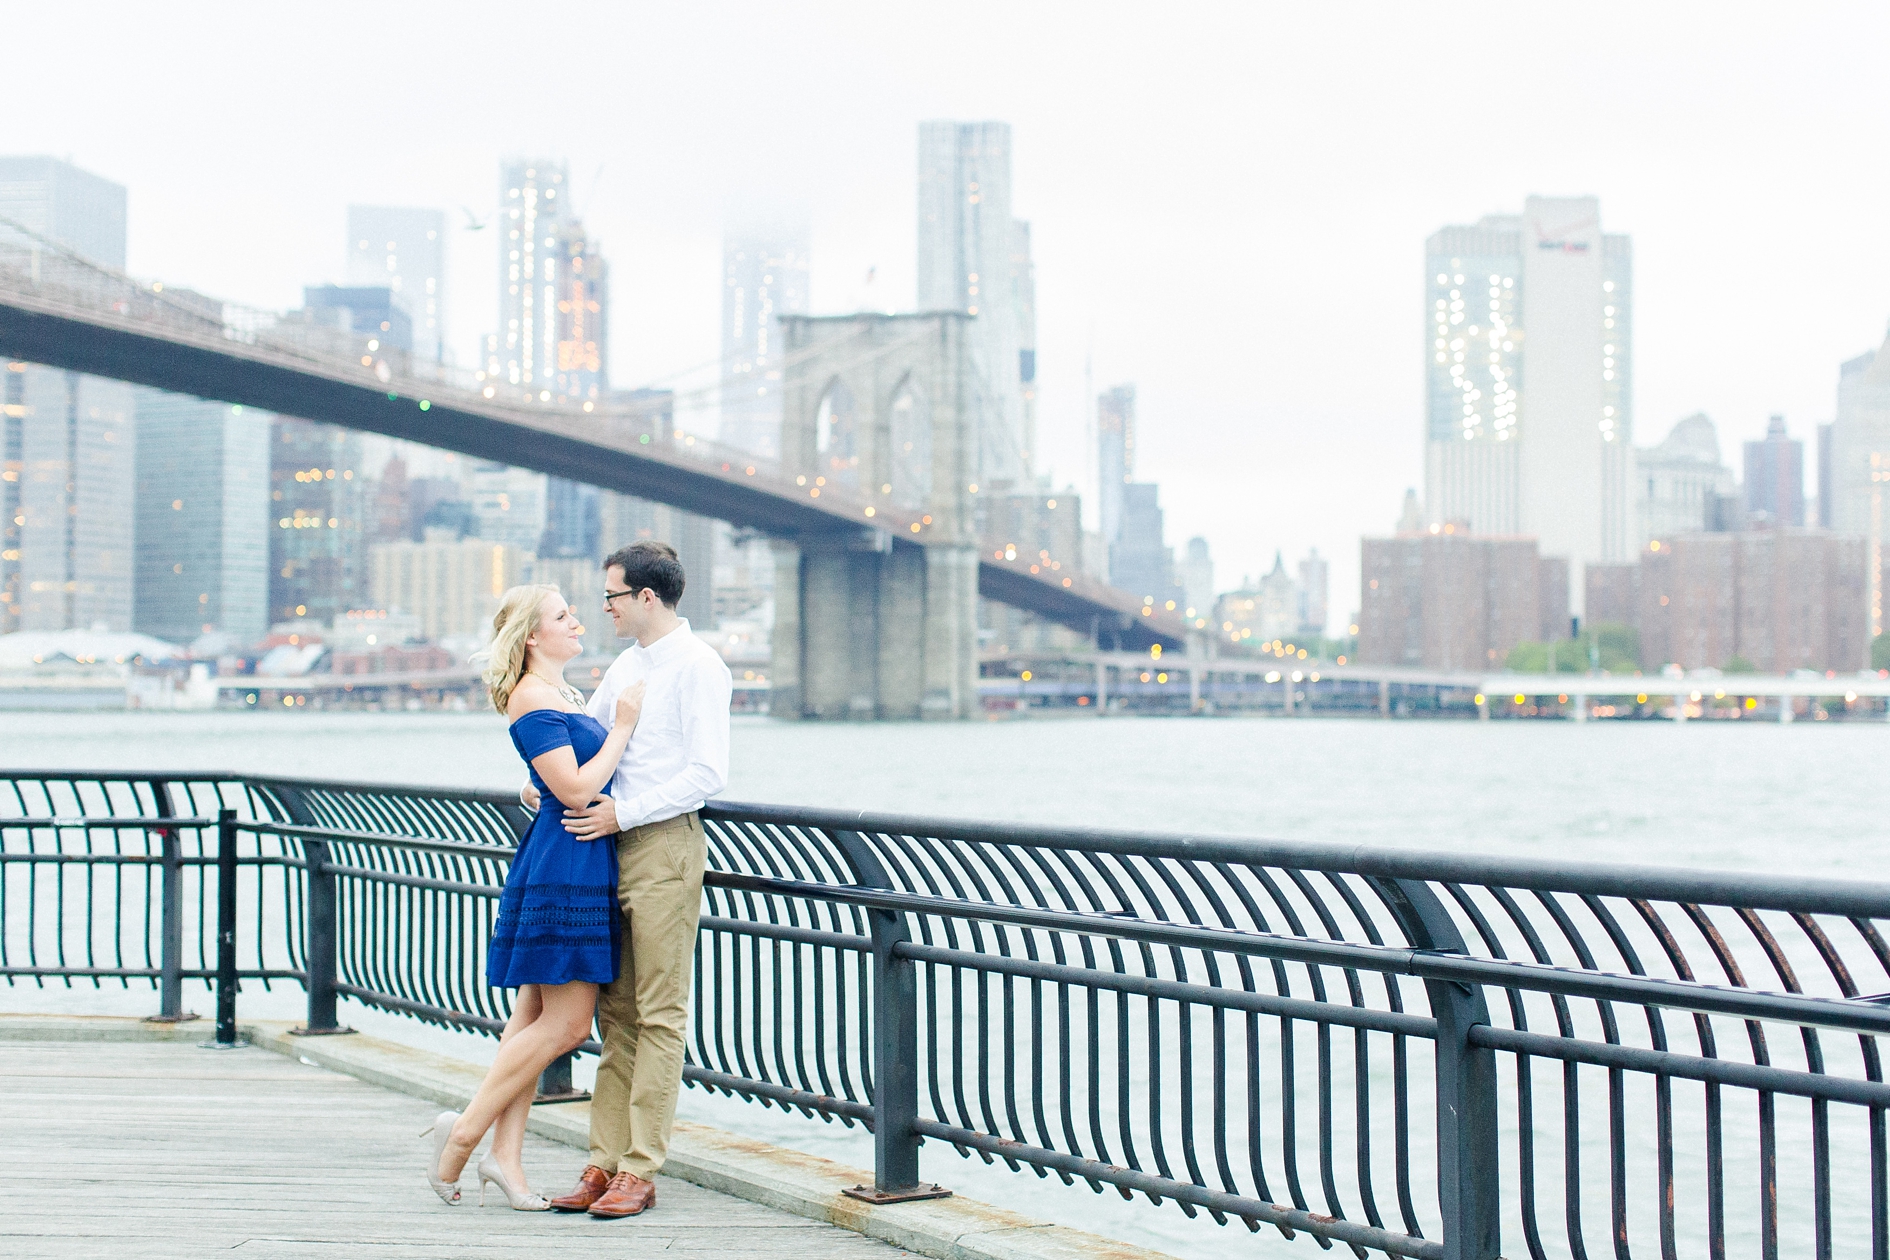 Courtney and Larry | New York City Engagement | © Ailyn La Torre Photography 2017